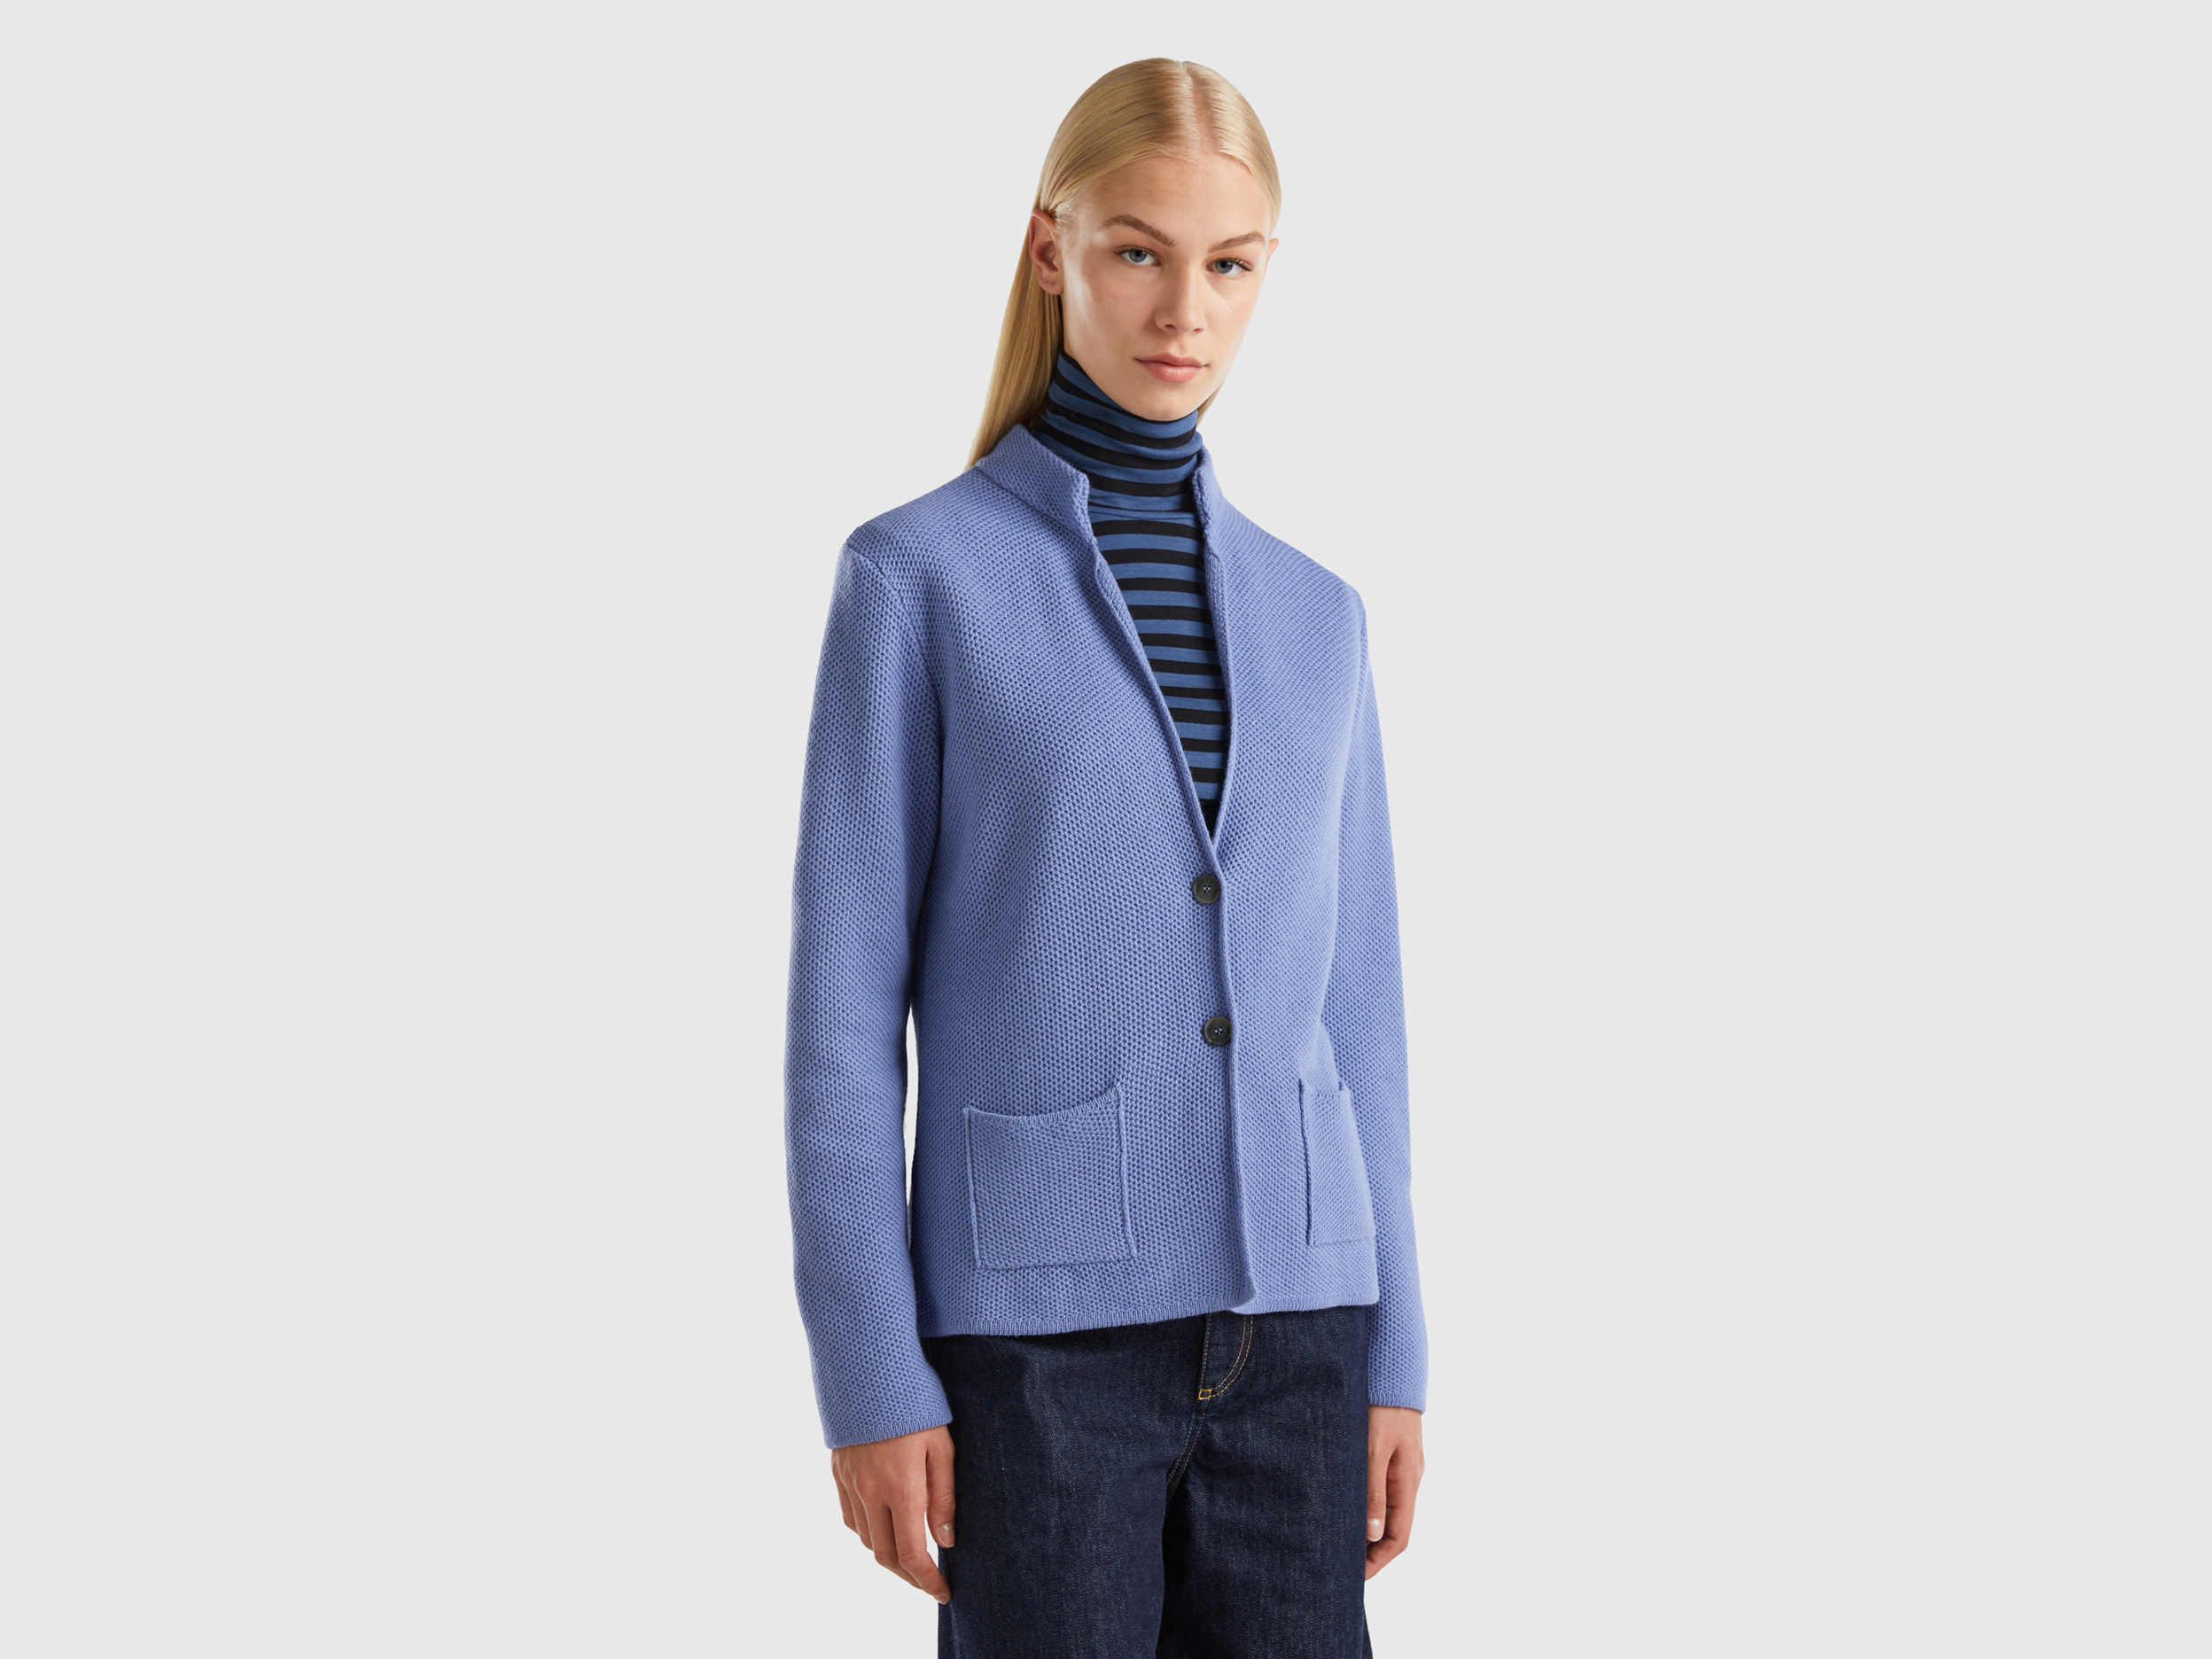 Benetton, Knit Jacket In Wool And Cashmere Blend, size M, Light Blue, Women